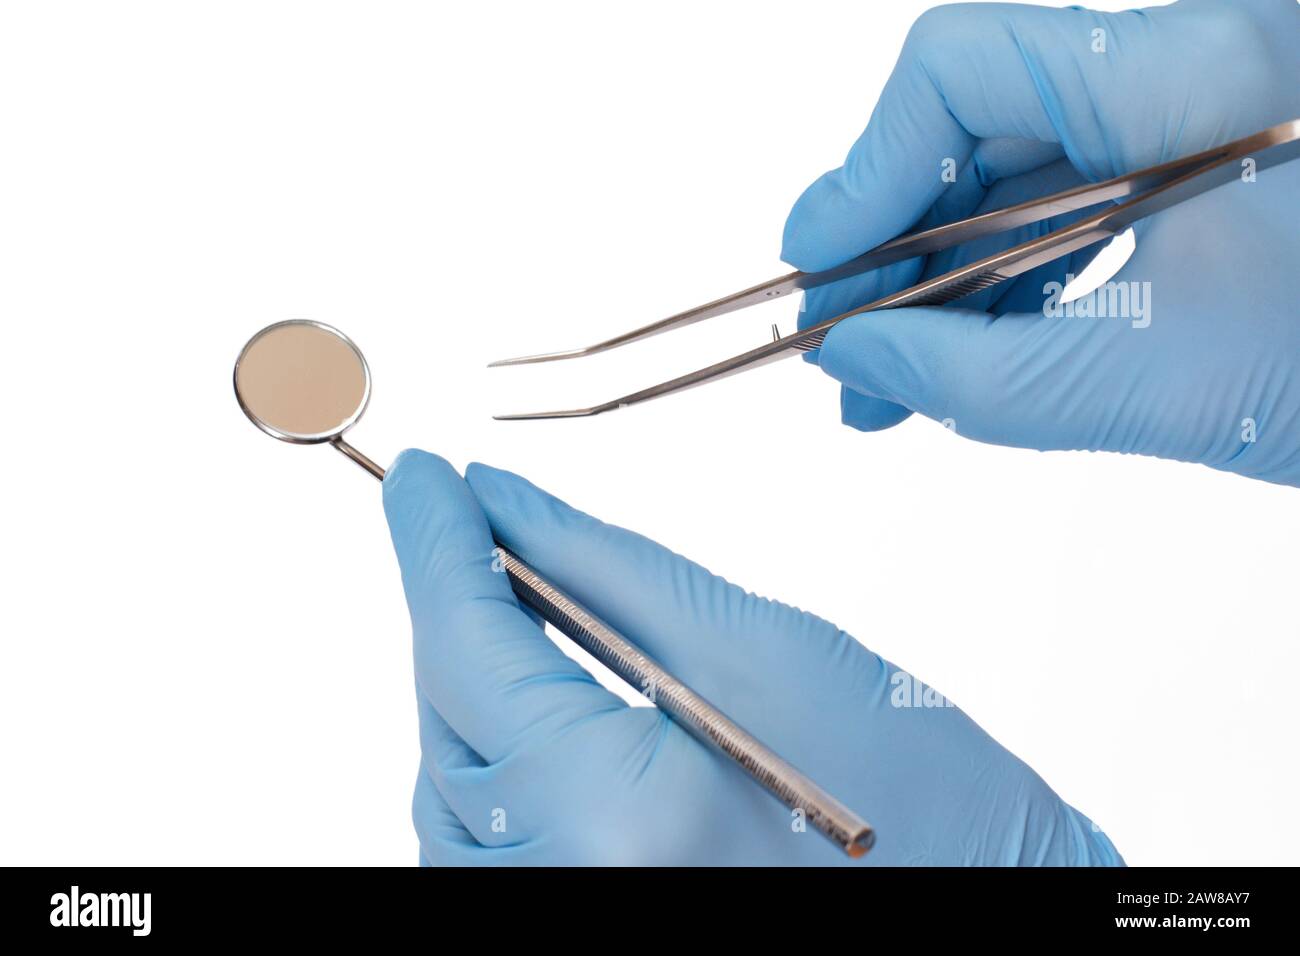 Dentist's hands in blue latex gloves with tweezers and mouth mirror on white isolated background. Medical tools concept. Stock Photo